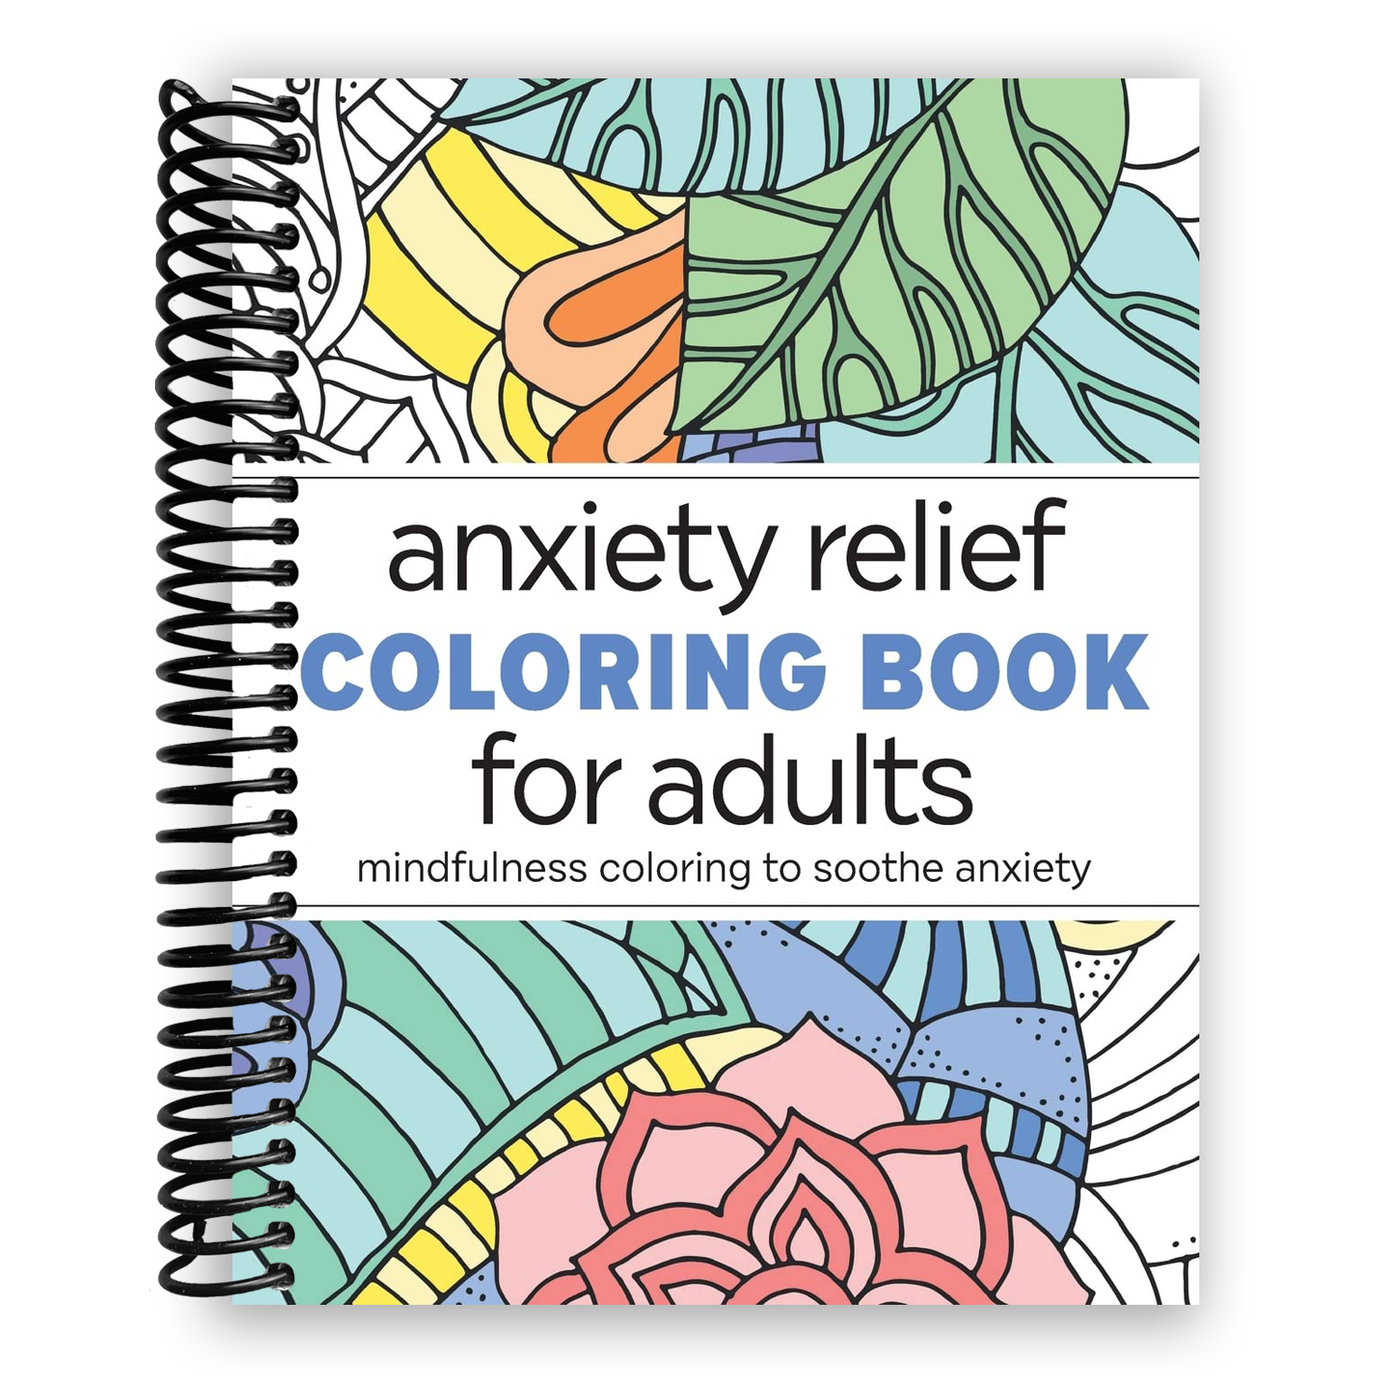 Anxiety Relief Coloring Book for Adults: Mindfulness Coloring to Soothe Anxiety(Spiral Bound)